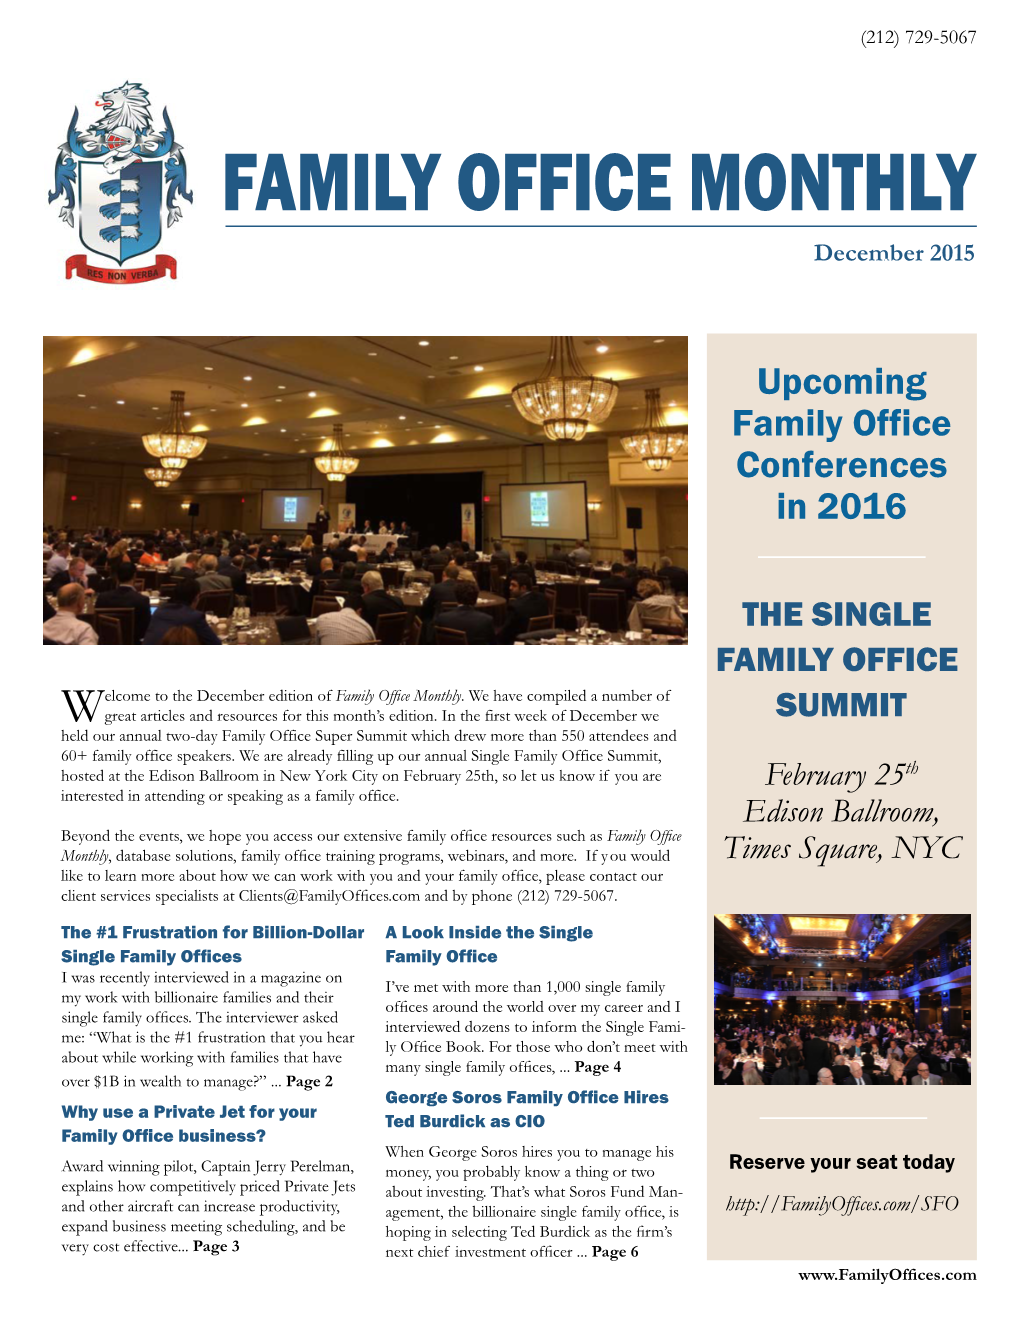 FAMILY OFFICE MONTHLY December 2015